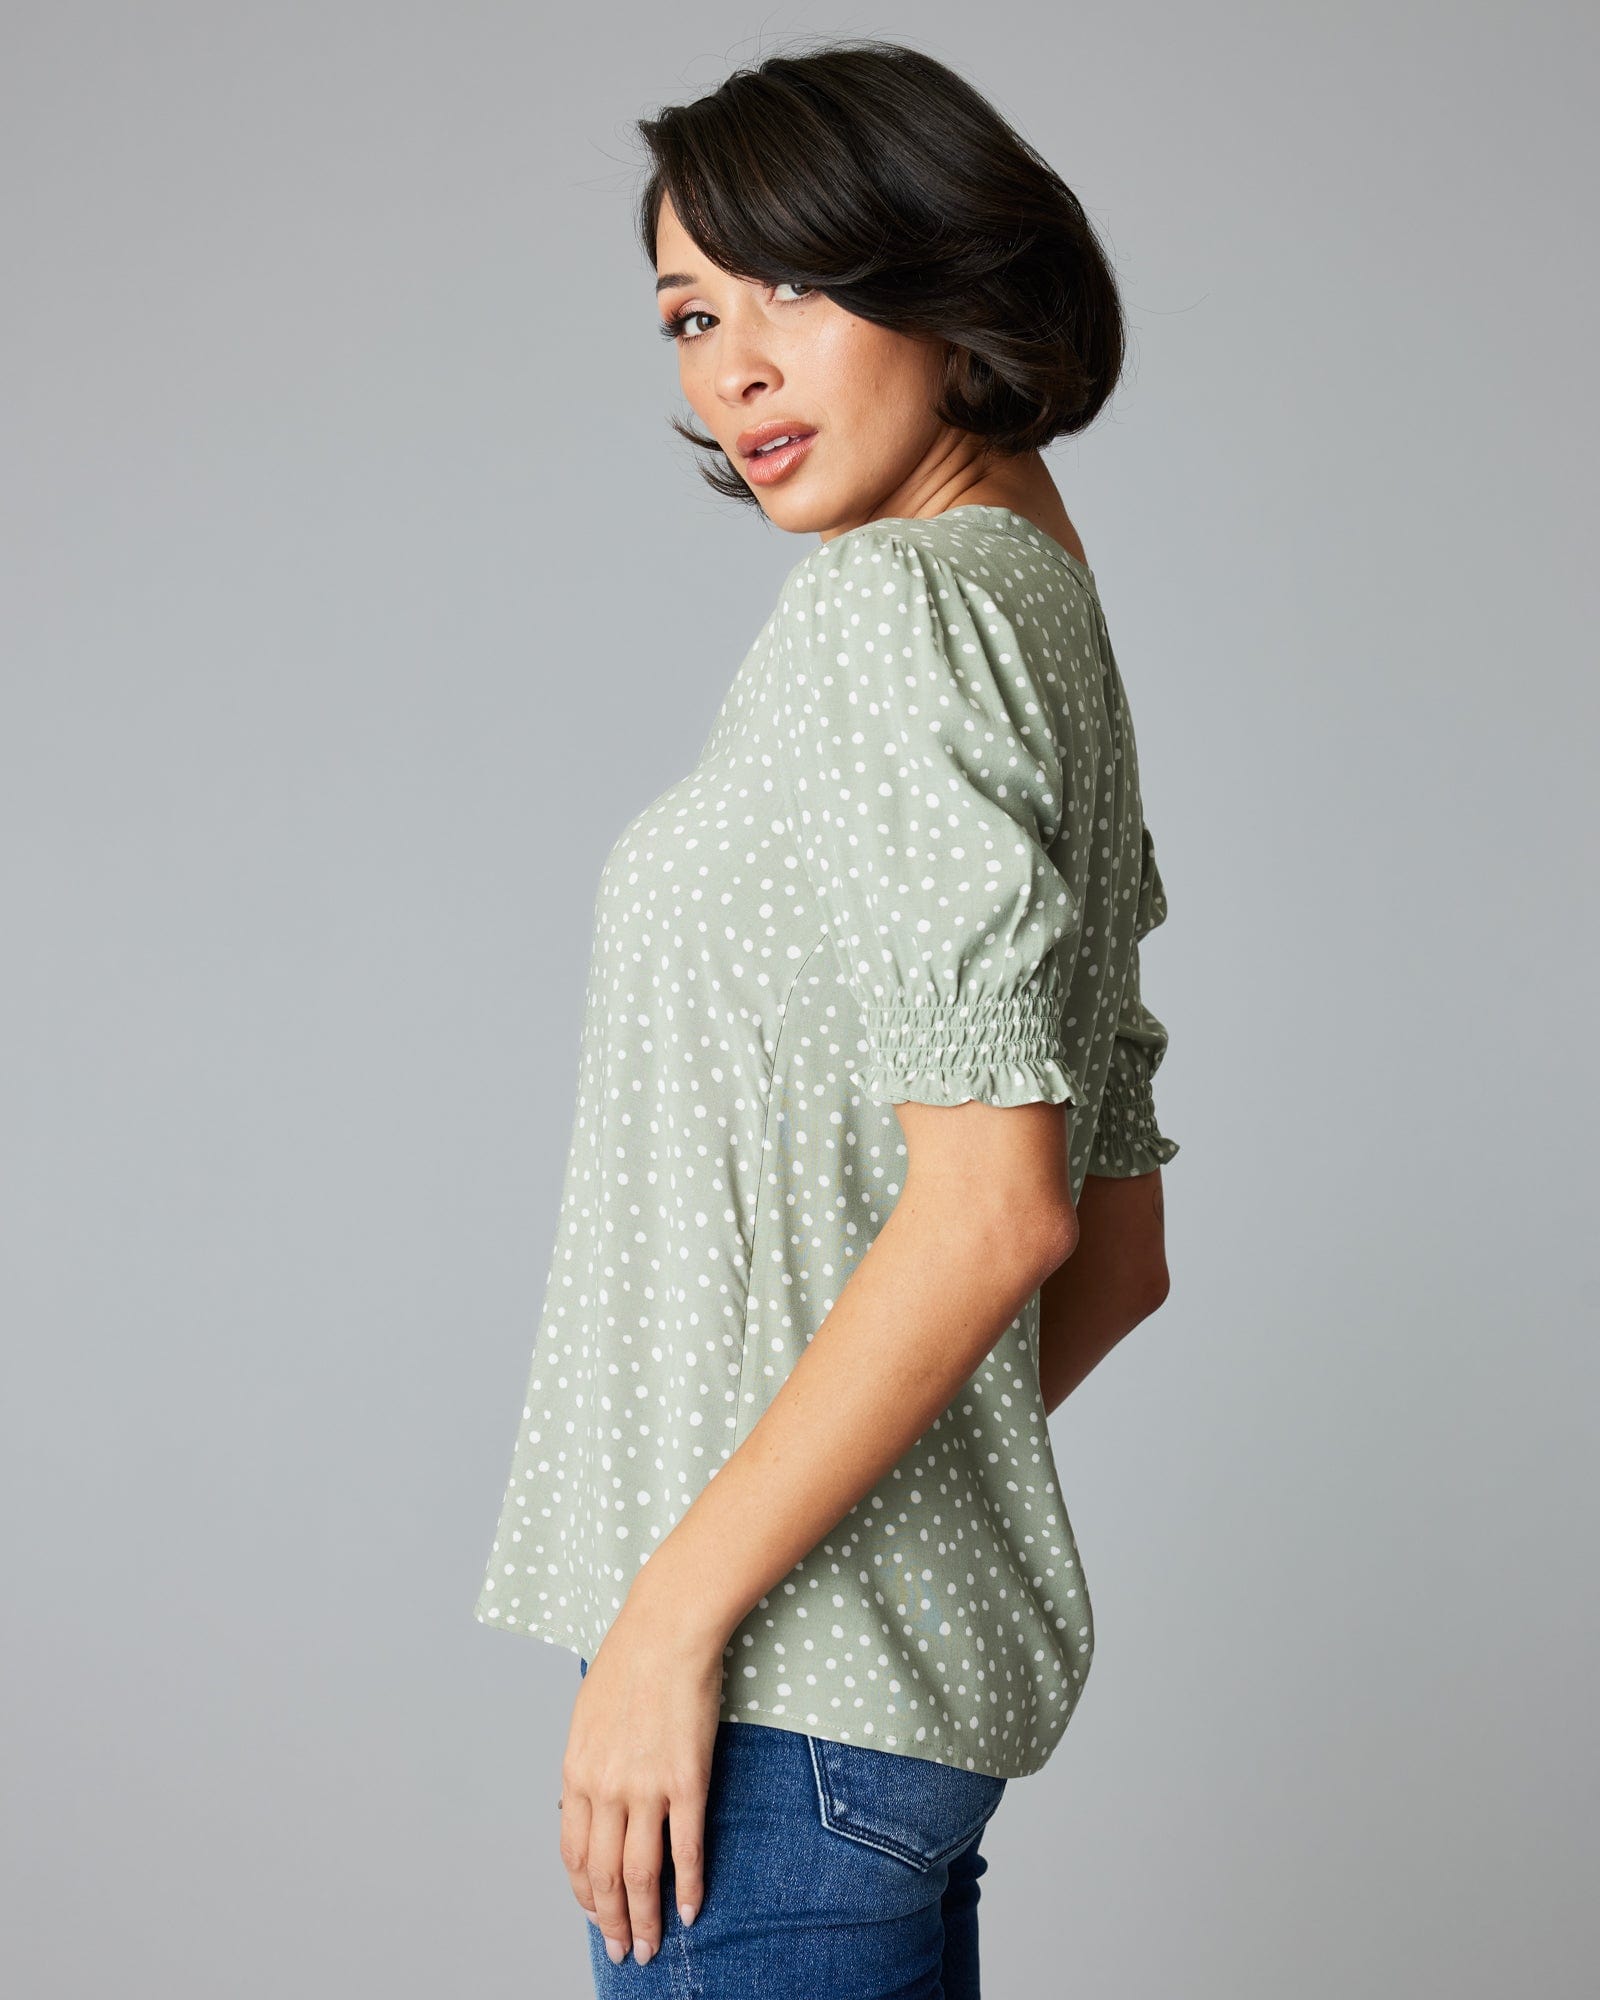 Woman in a short sleeve, green, polka dotted blouse.